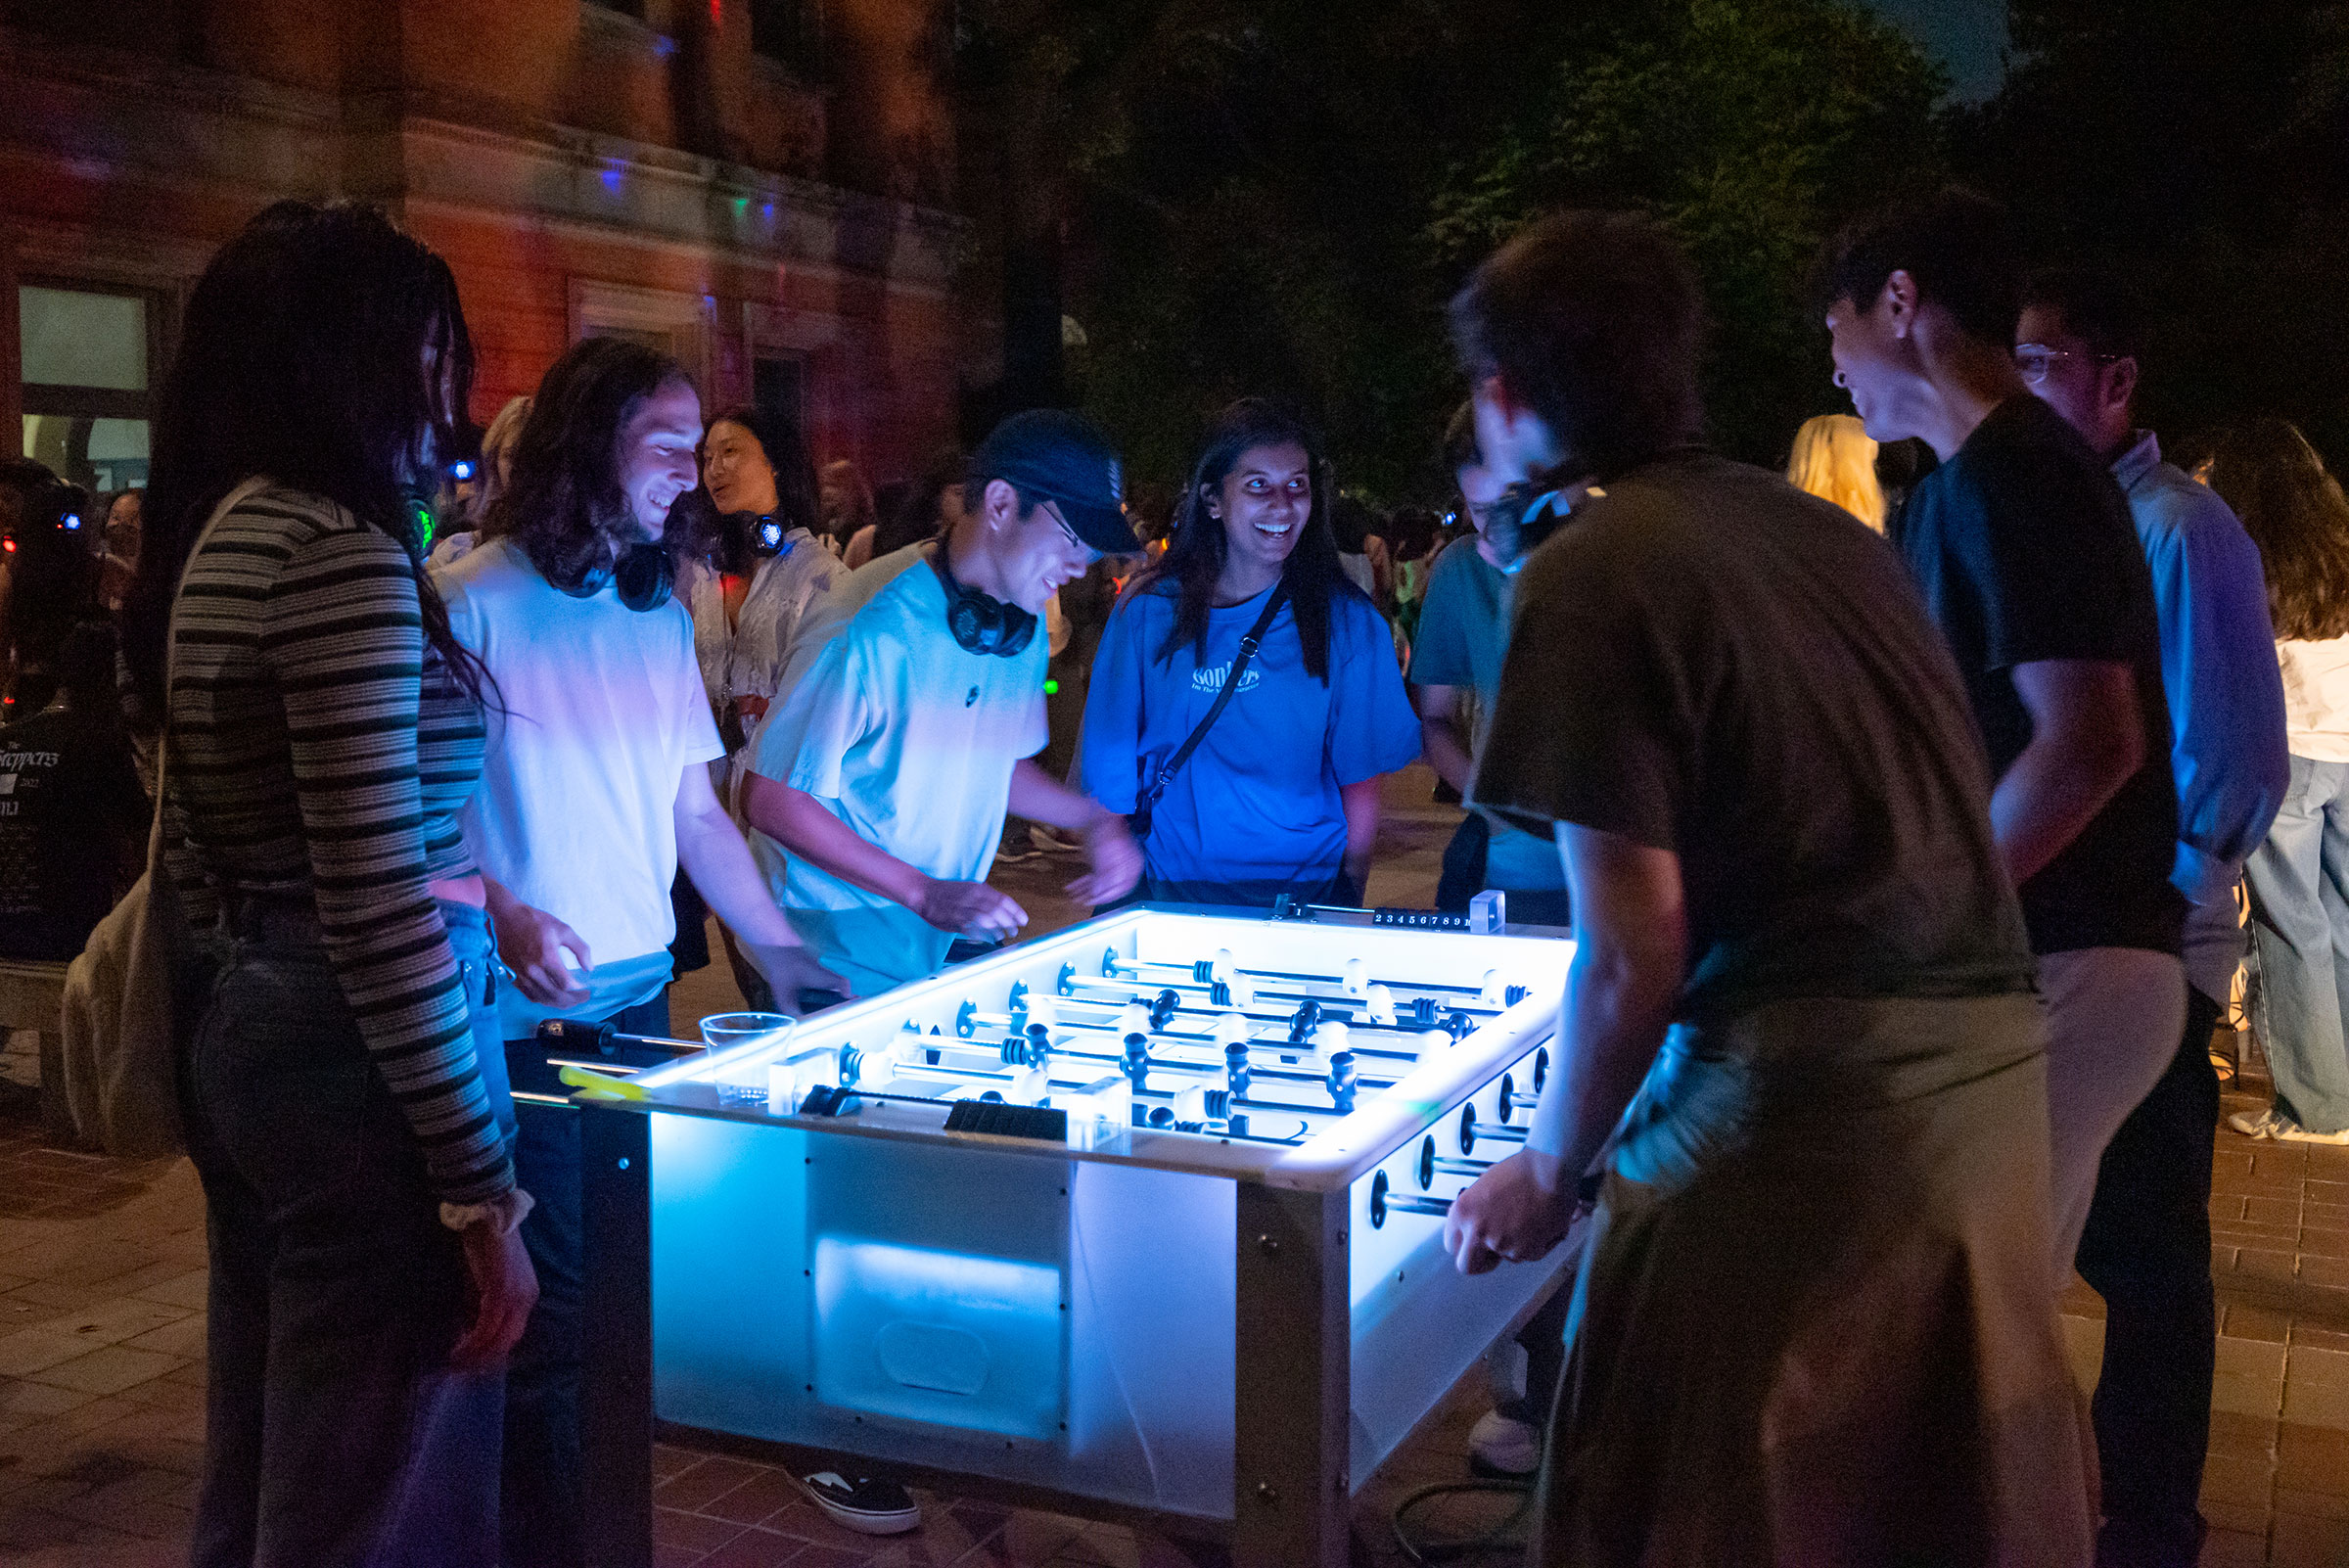 Students are smiling and playing around a glowing foosball table.